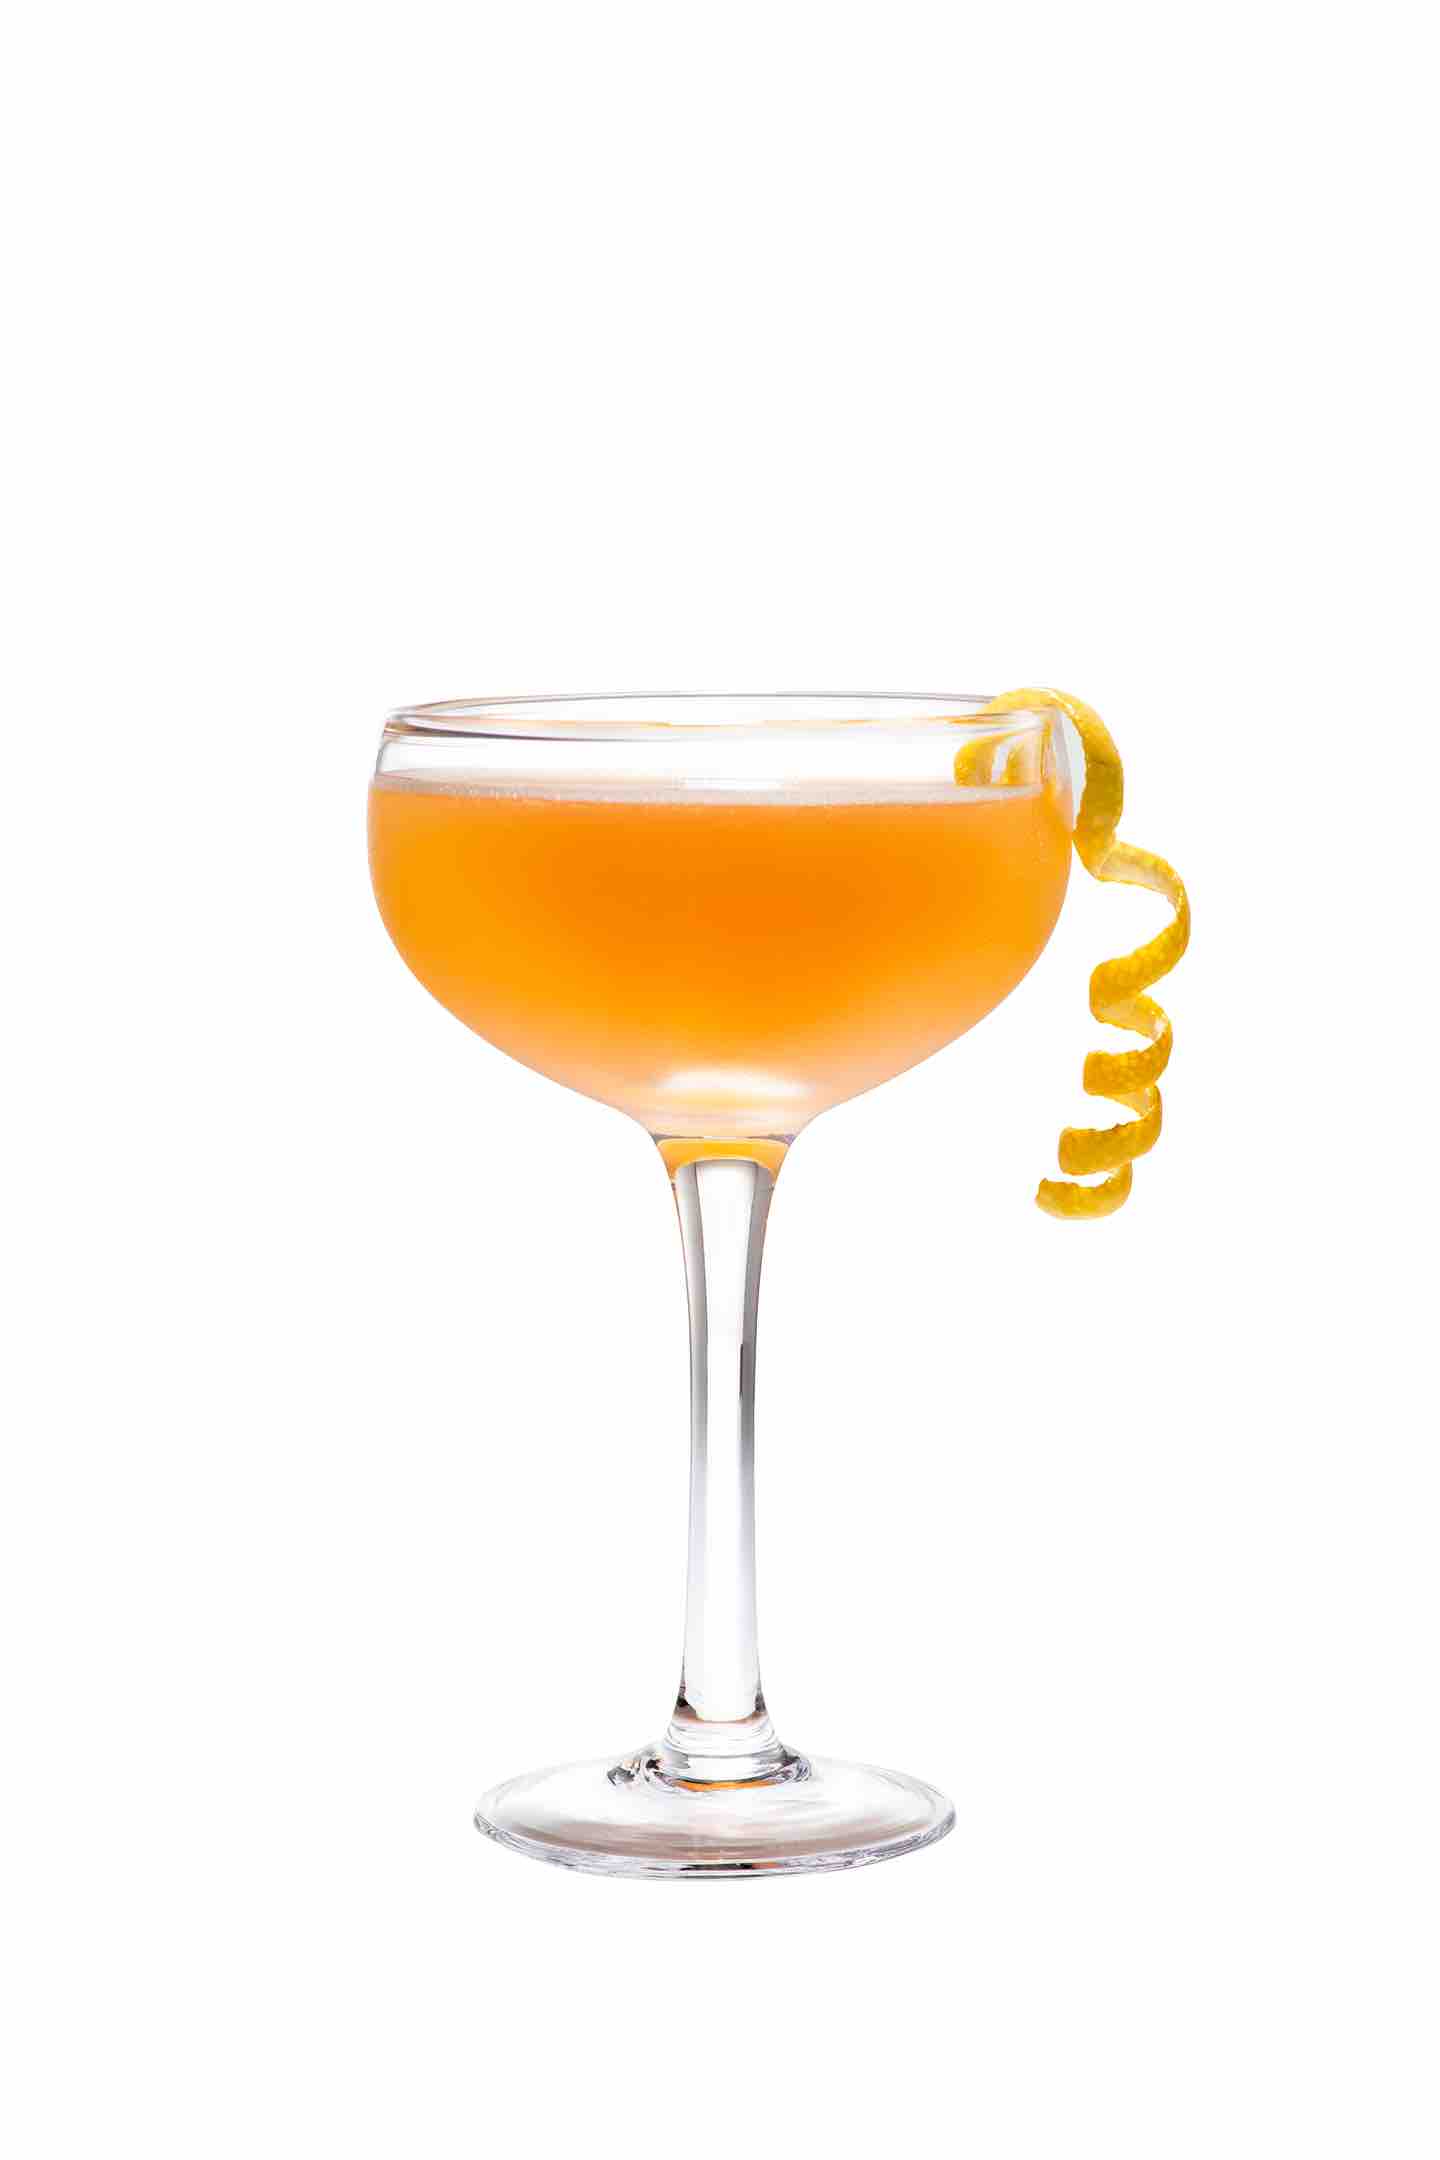 We Have Listed 7 Drinks To Mix With Cognac